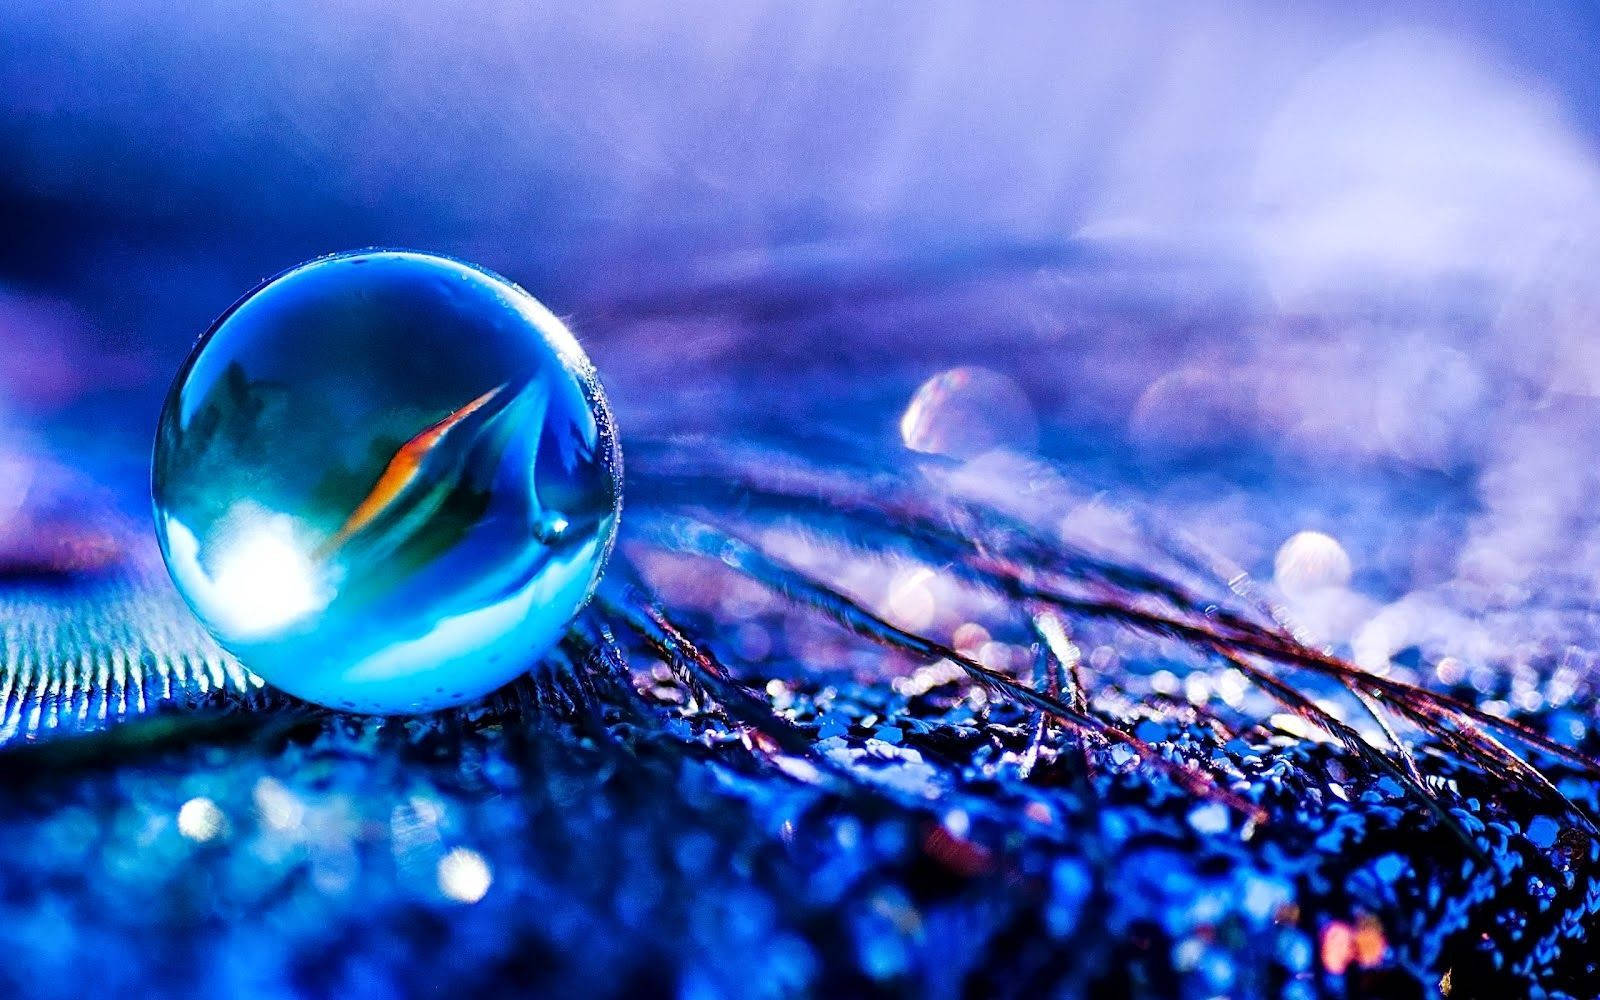 Animated Blue Marble Close-up Wallpaper